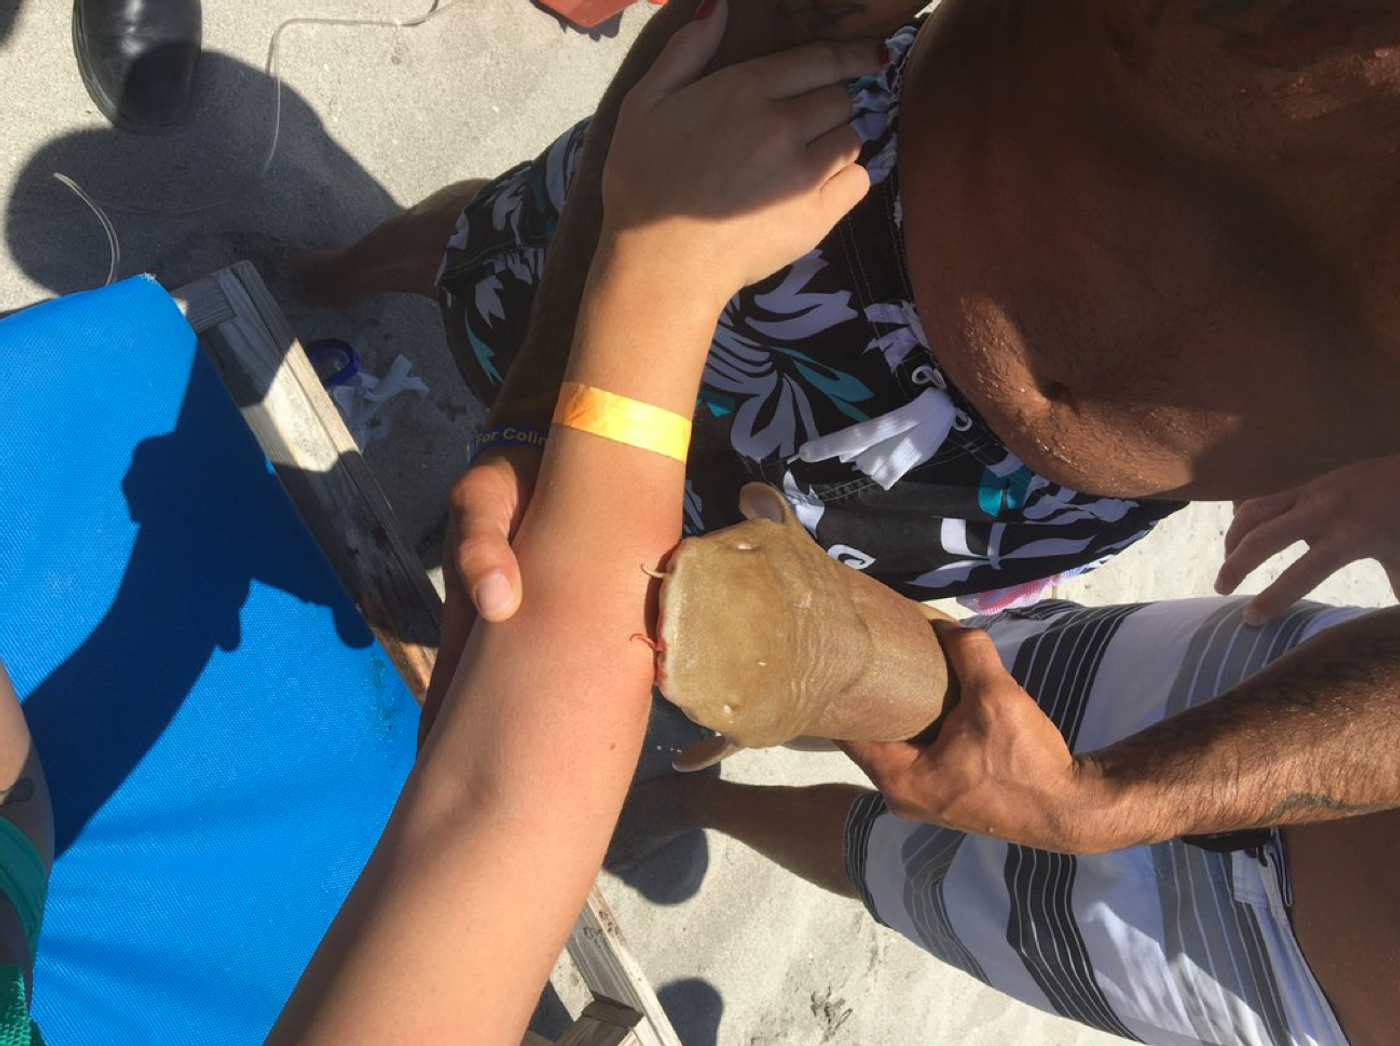 A baby nurse shark locked itself to a female beach-goer's arm and refused to let go.